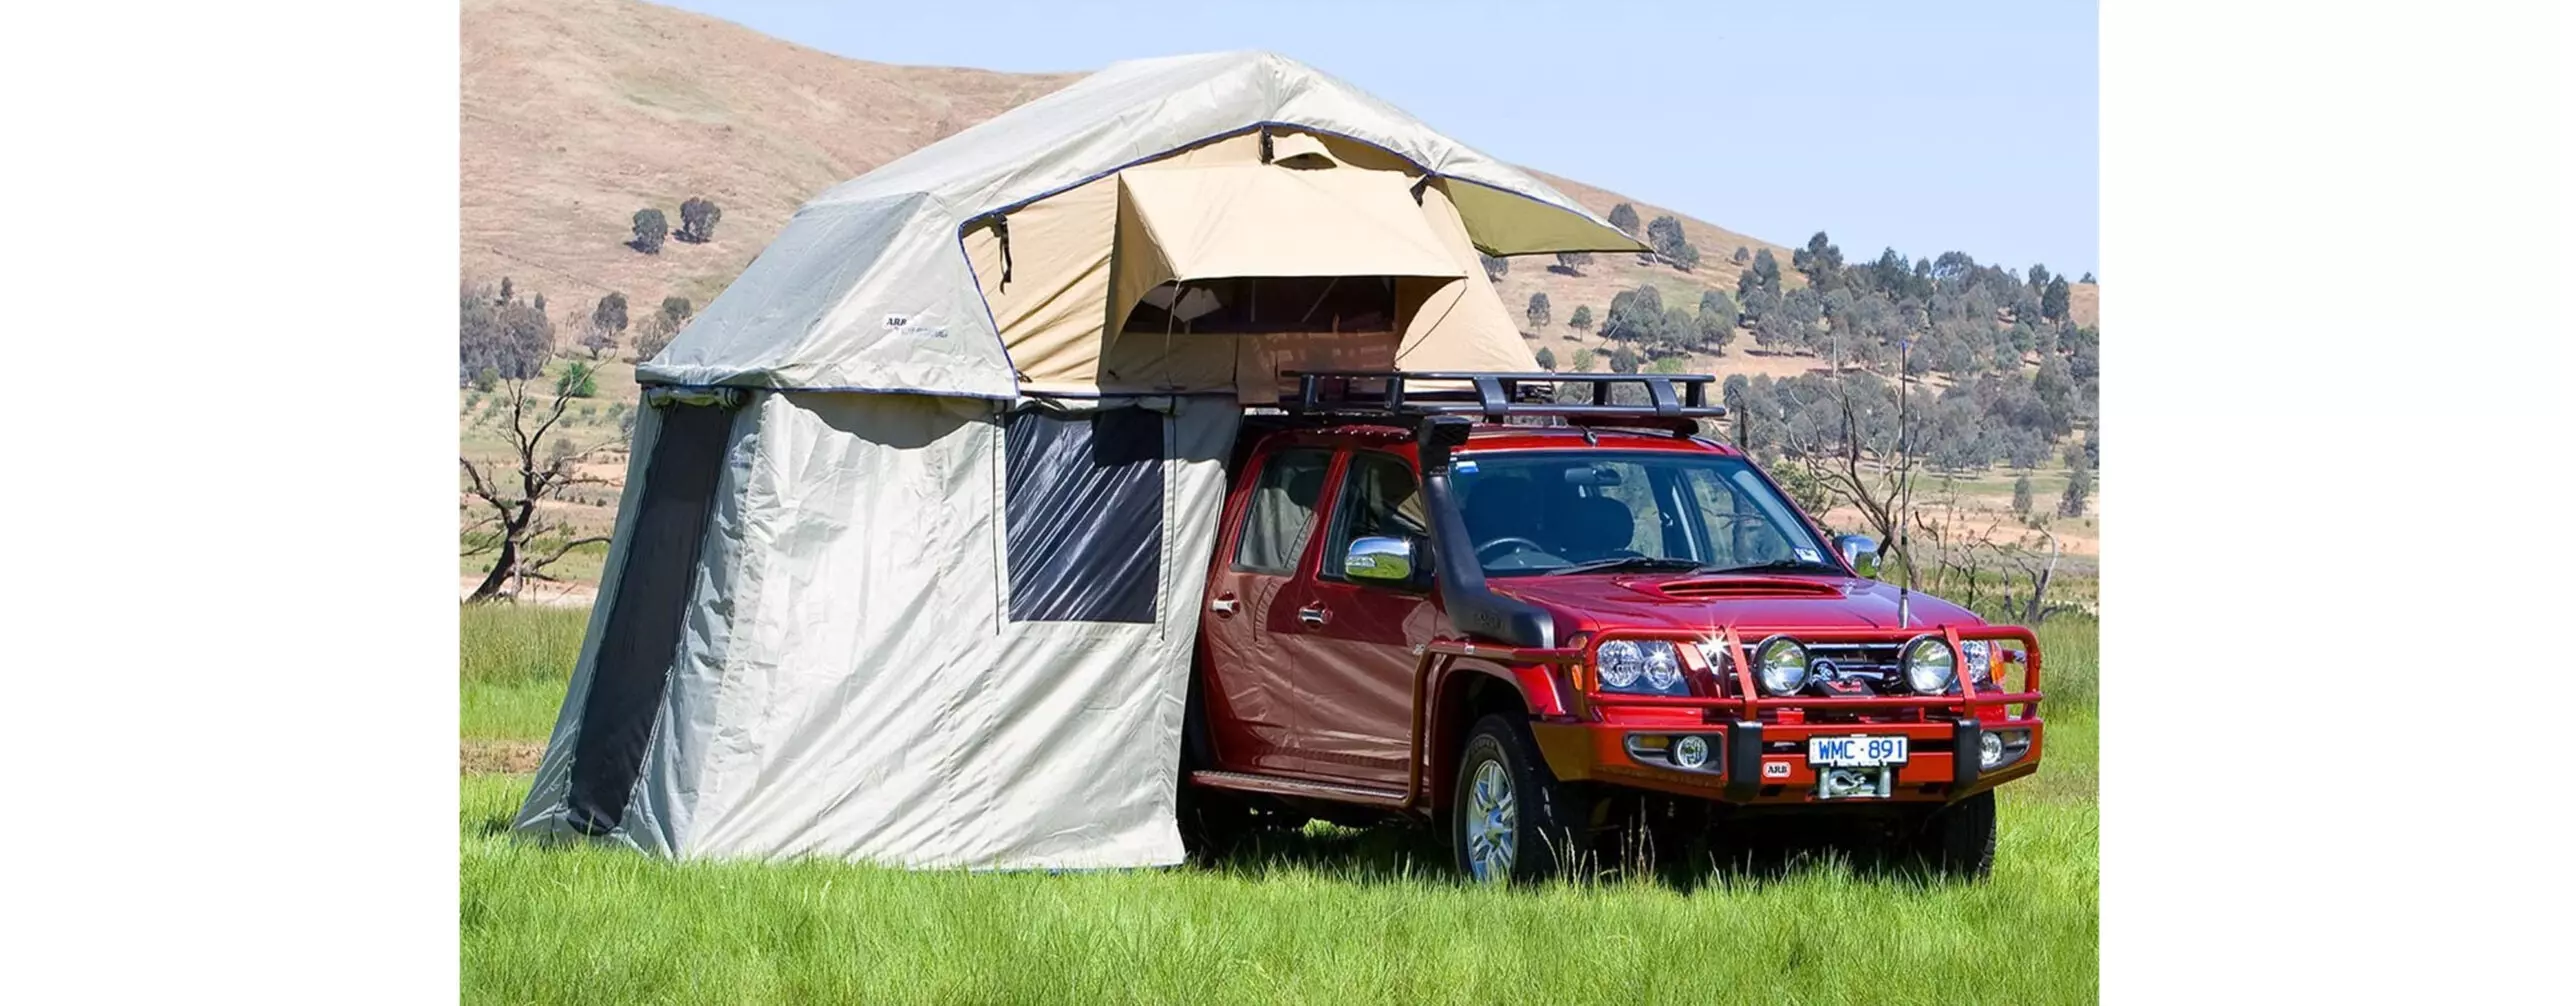 The Best Rooftop Tents (Review) in 2021